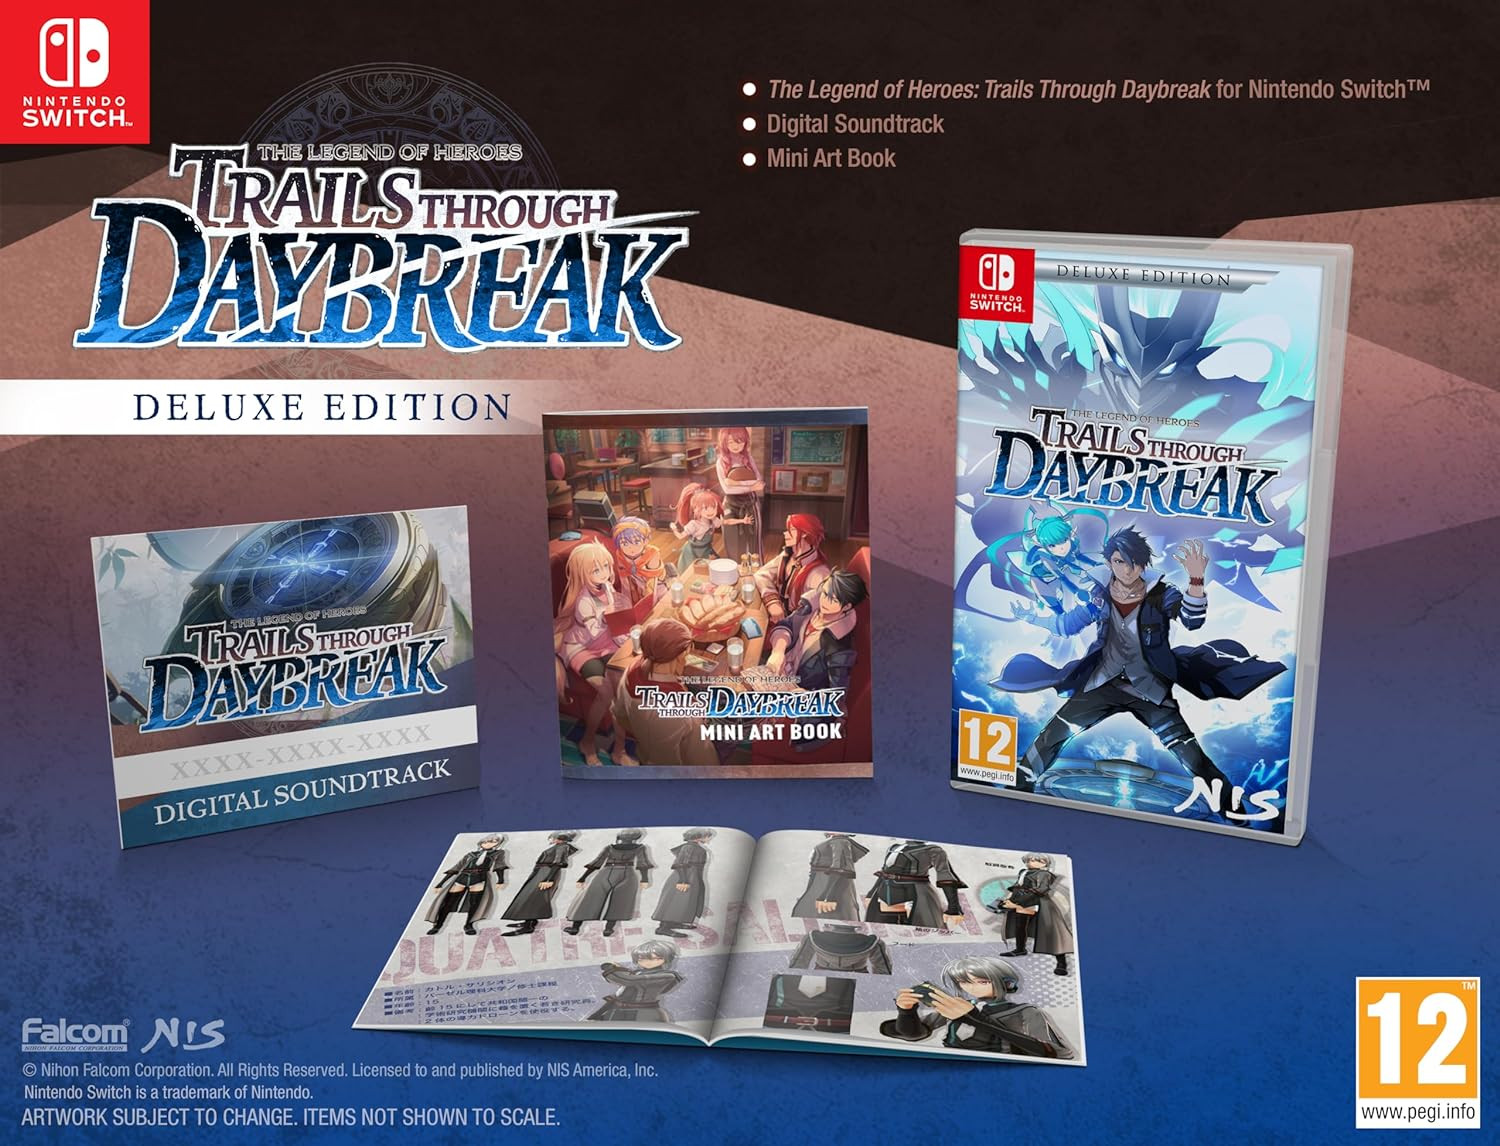 NIS The Legend of Heroes Trails Through Daybreak Deluxe Edition